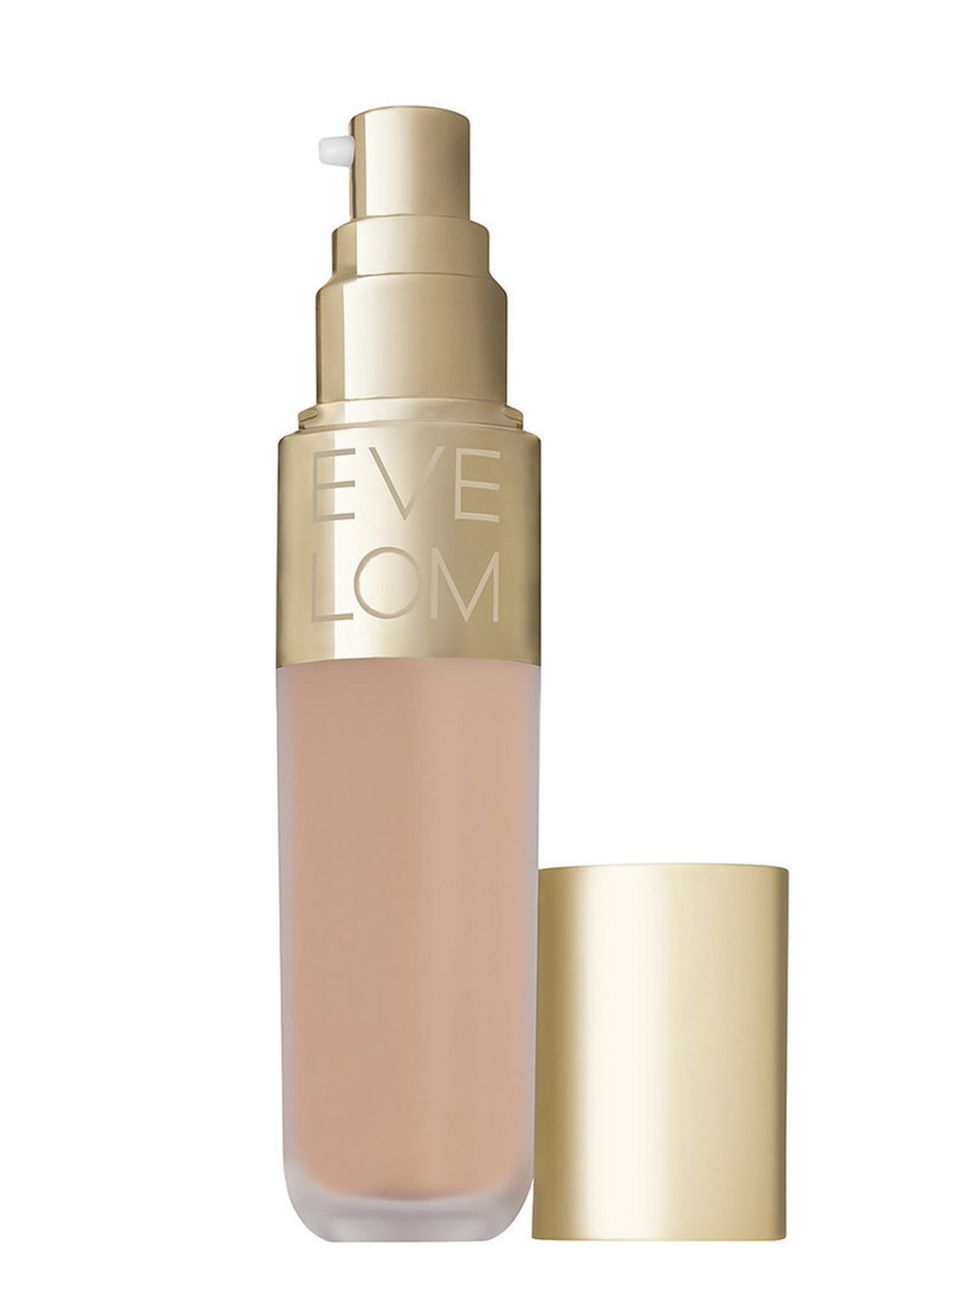 <p><a href="http://www.evelom.com/Radiance-Lift-Foundation-SPF15/MEV0028_1083,en_GB,pd.html">Eve Lom Radiance Lift Foundation, £50.</a></p><p>First up, create a flawless base by applying this medium coverage, silky foundation. Start in the middle of your 